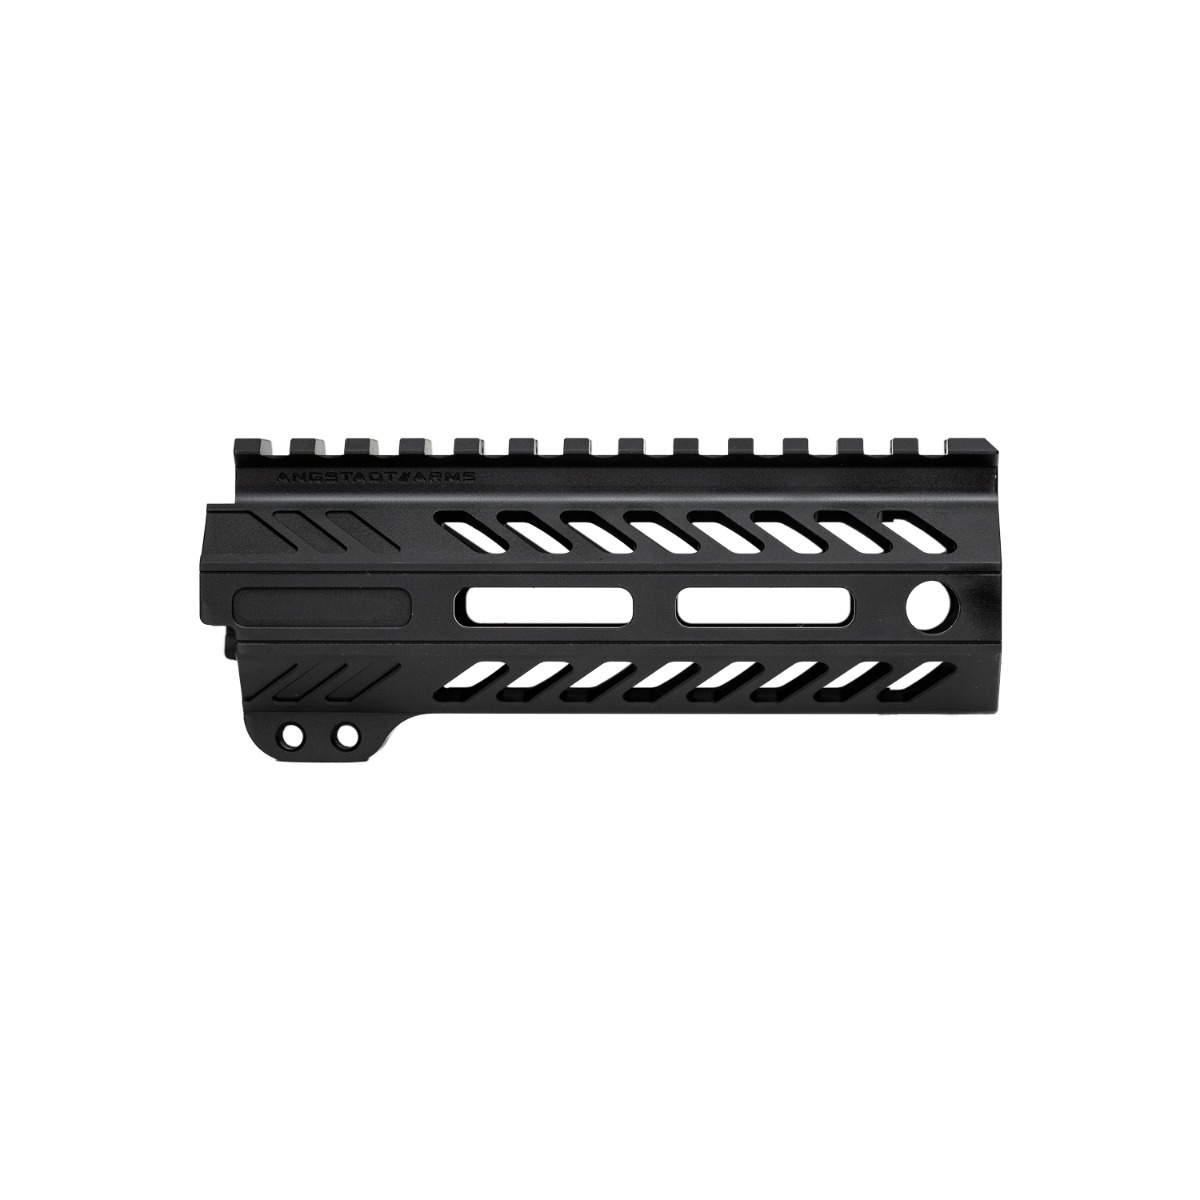 Angstadt Arms AA055HGMLT Ultra Light Handguard  made of Aluminum with Black Anodized Finish, M-LOK Style, Picatinny Rail & 5.50